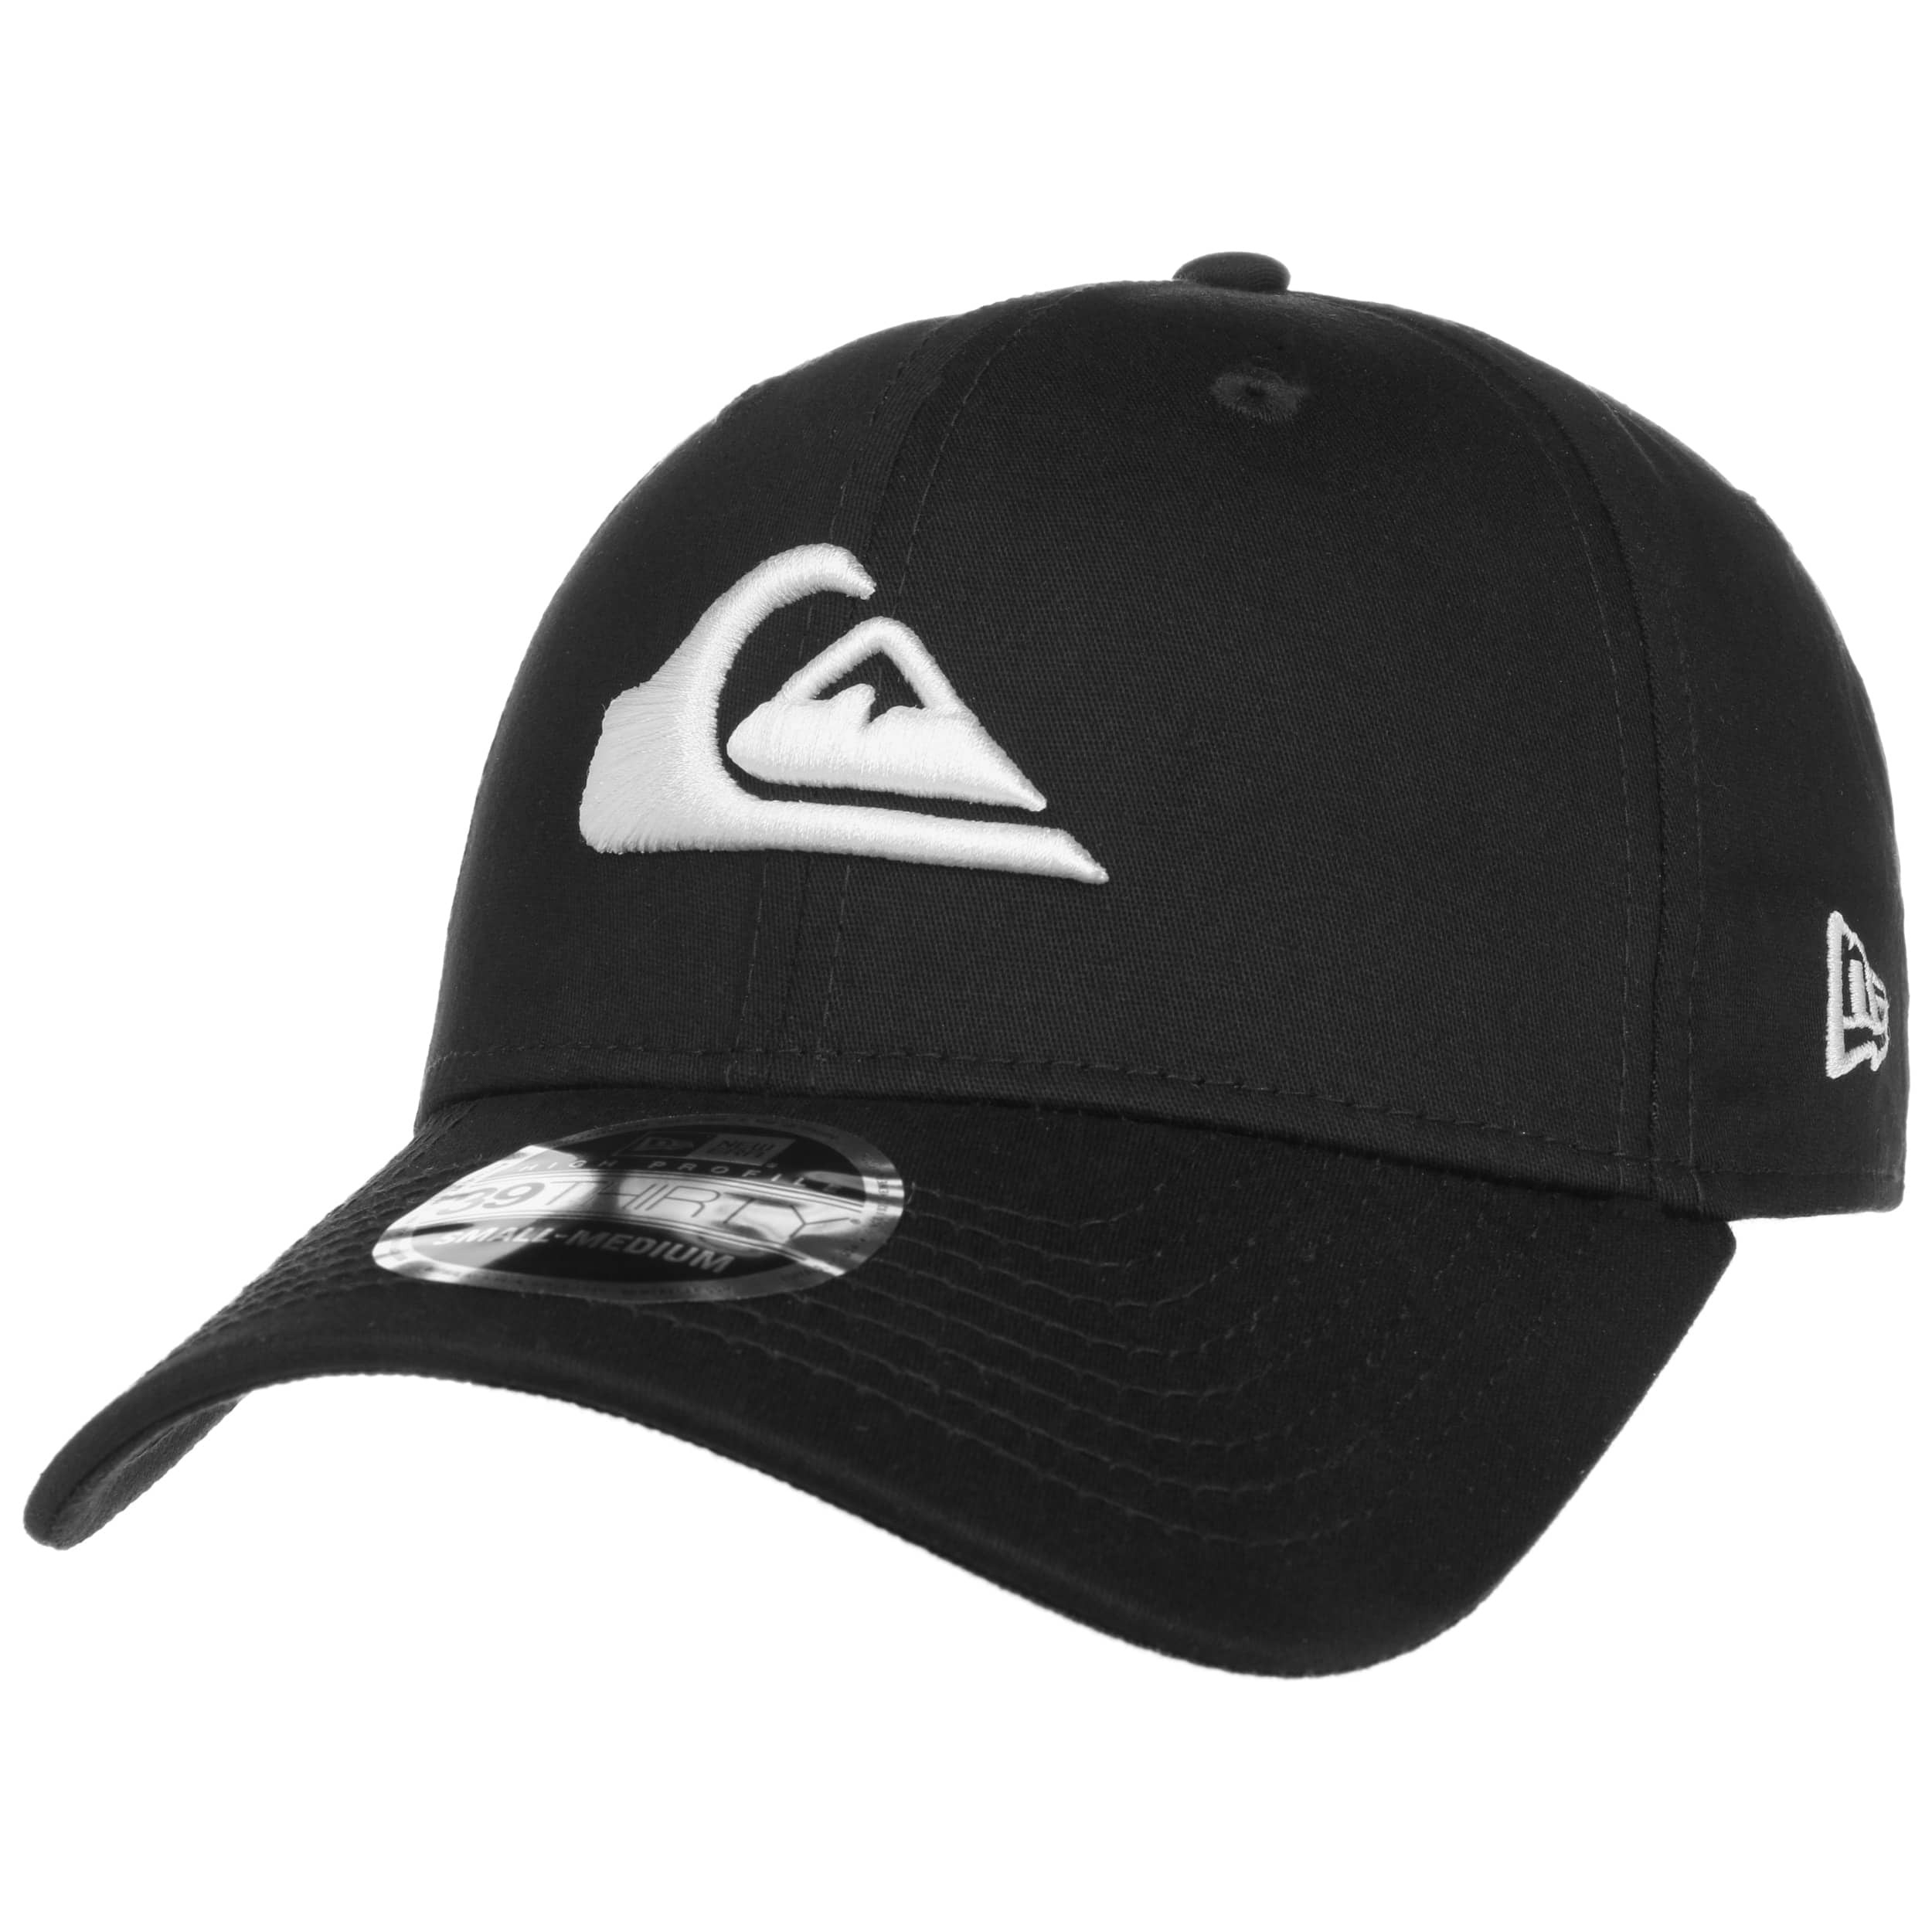 Cap - & 29,95 Mountain Fitted by € Wave Quiksilver